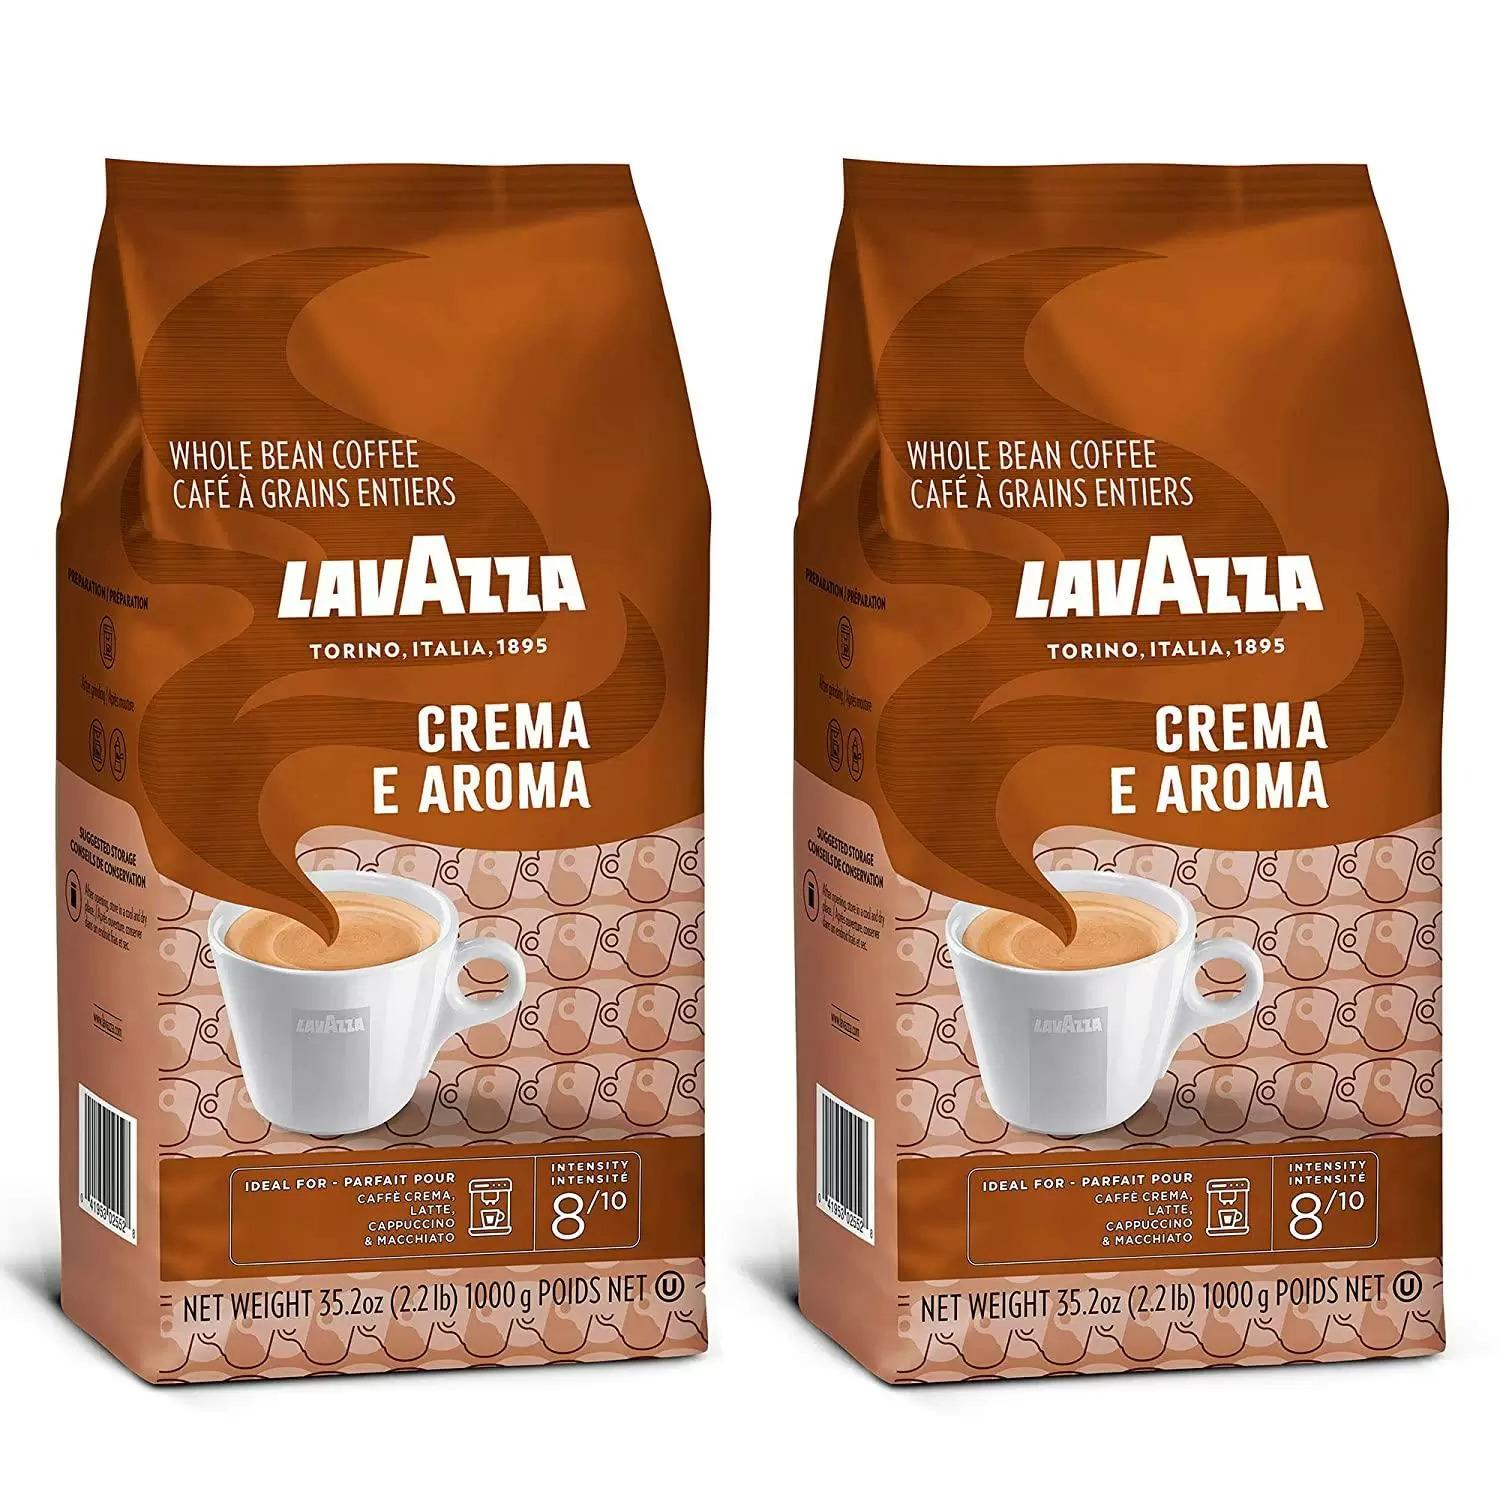 Lavazza Crema e Aroma Coffee Beans 2 Pack for $24.05 Shipped